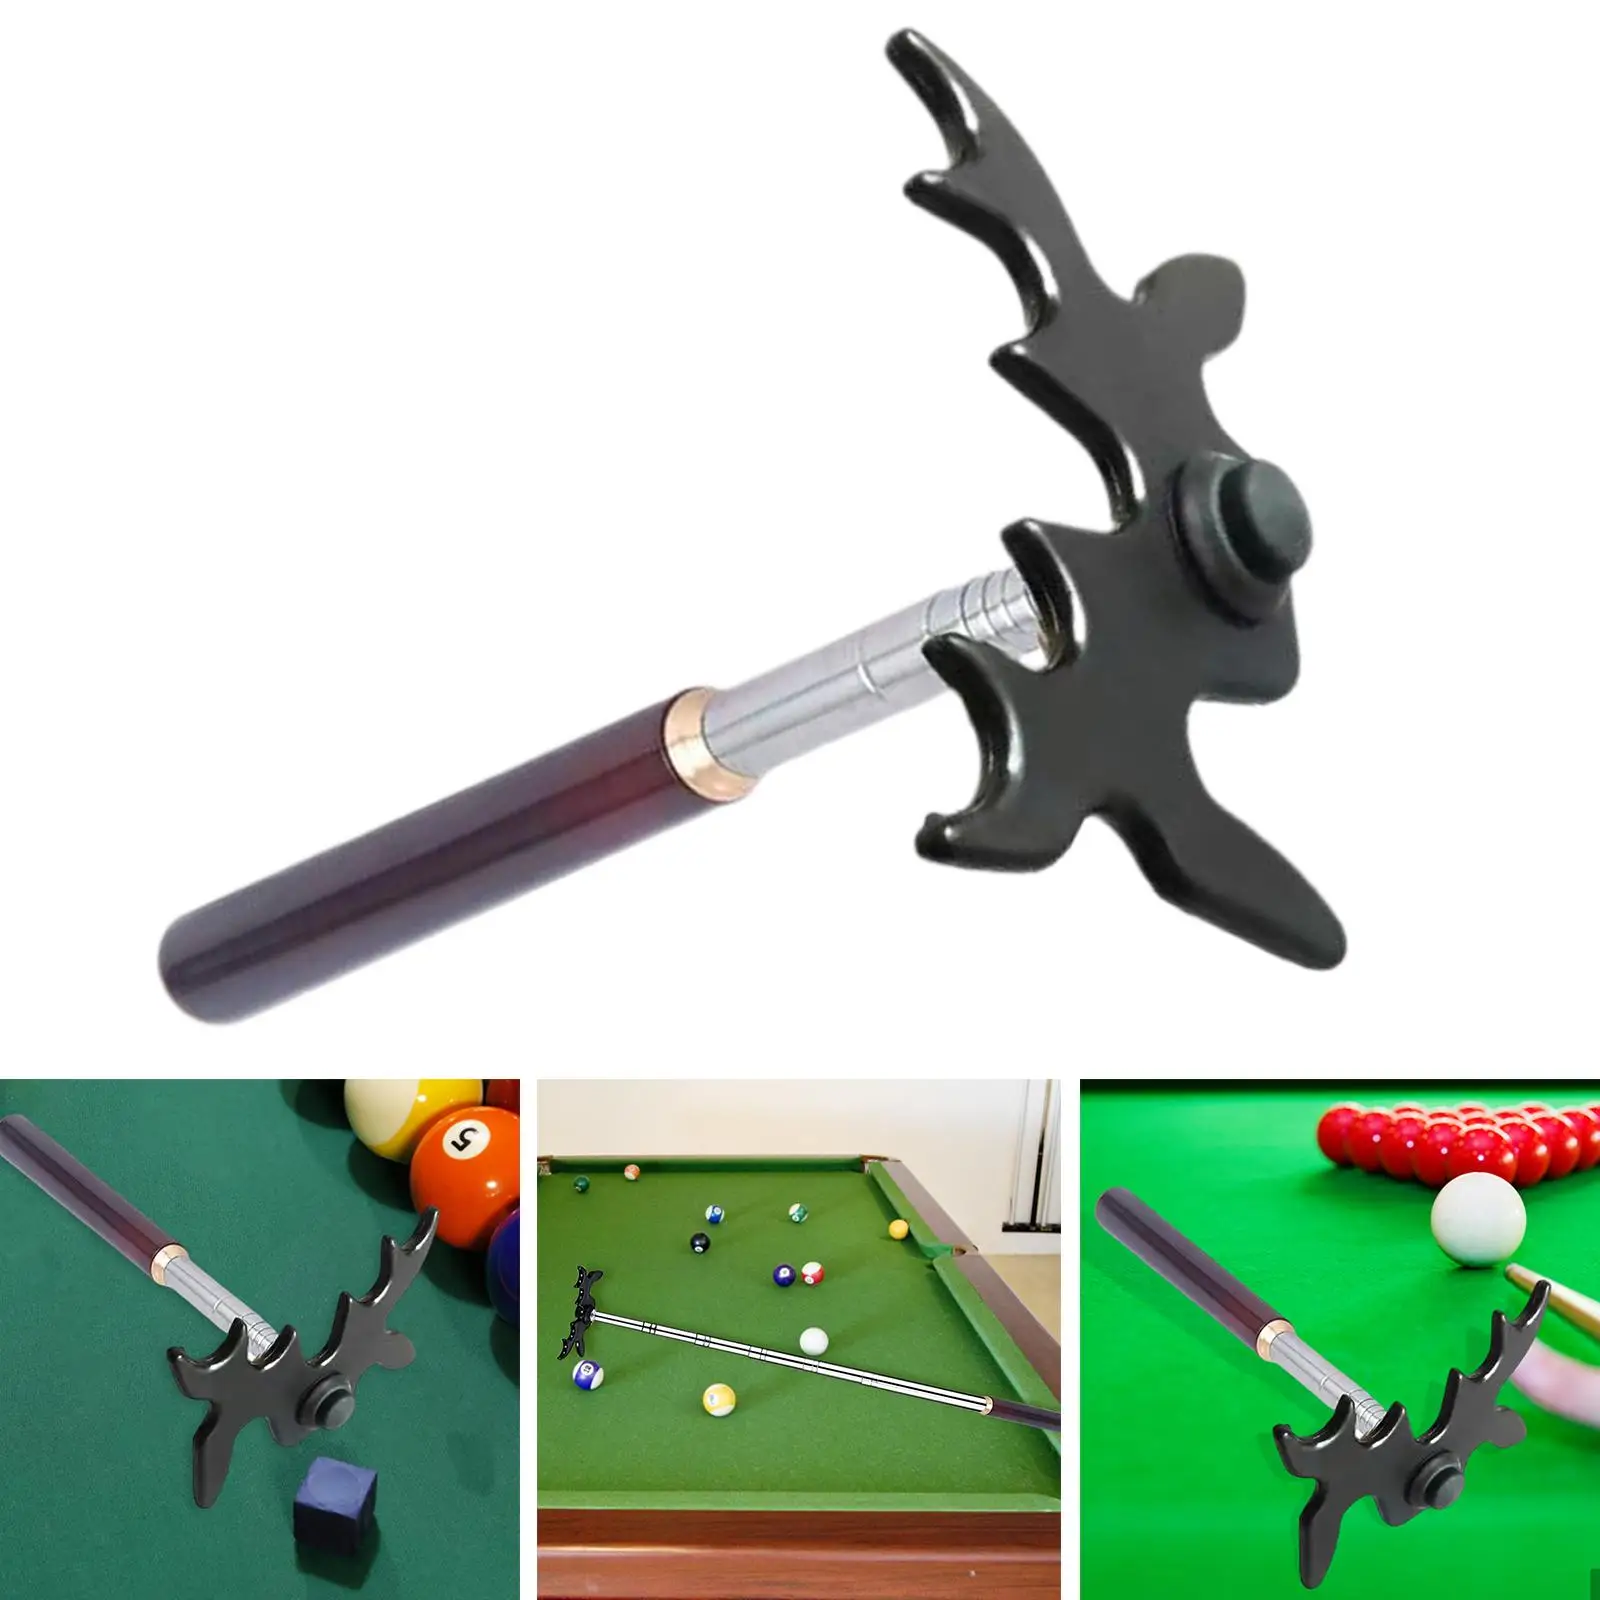 Billiards Cue Bridge with Removable Head Telescoping Extendable Snooker Pool